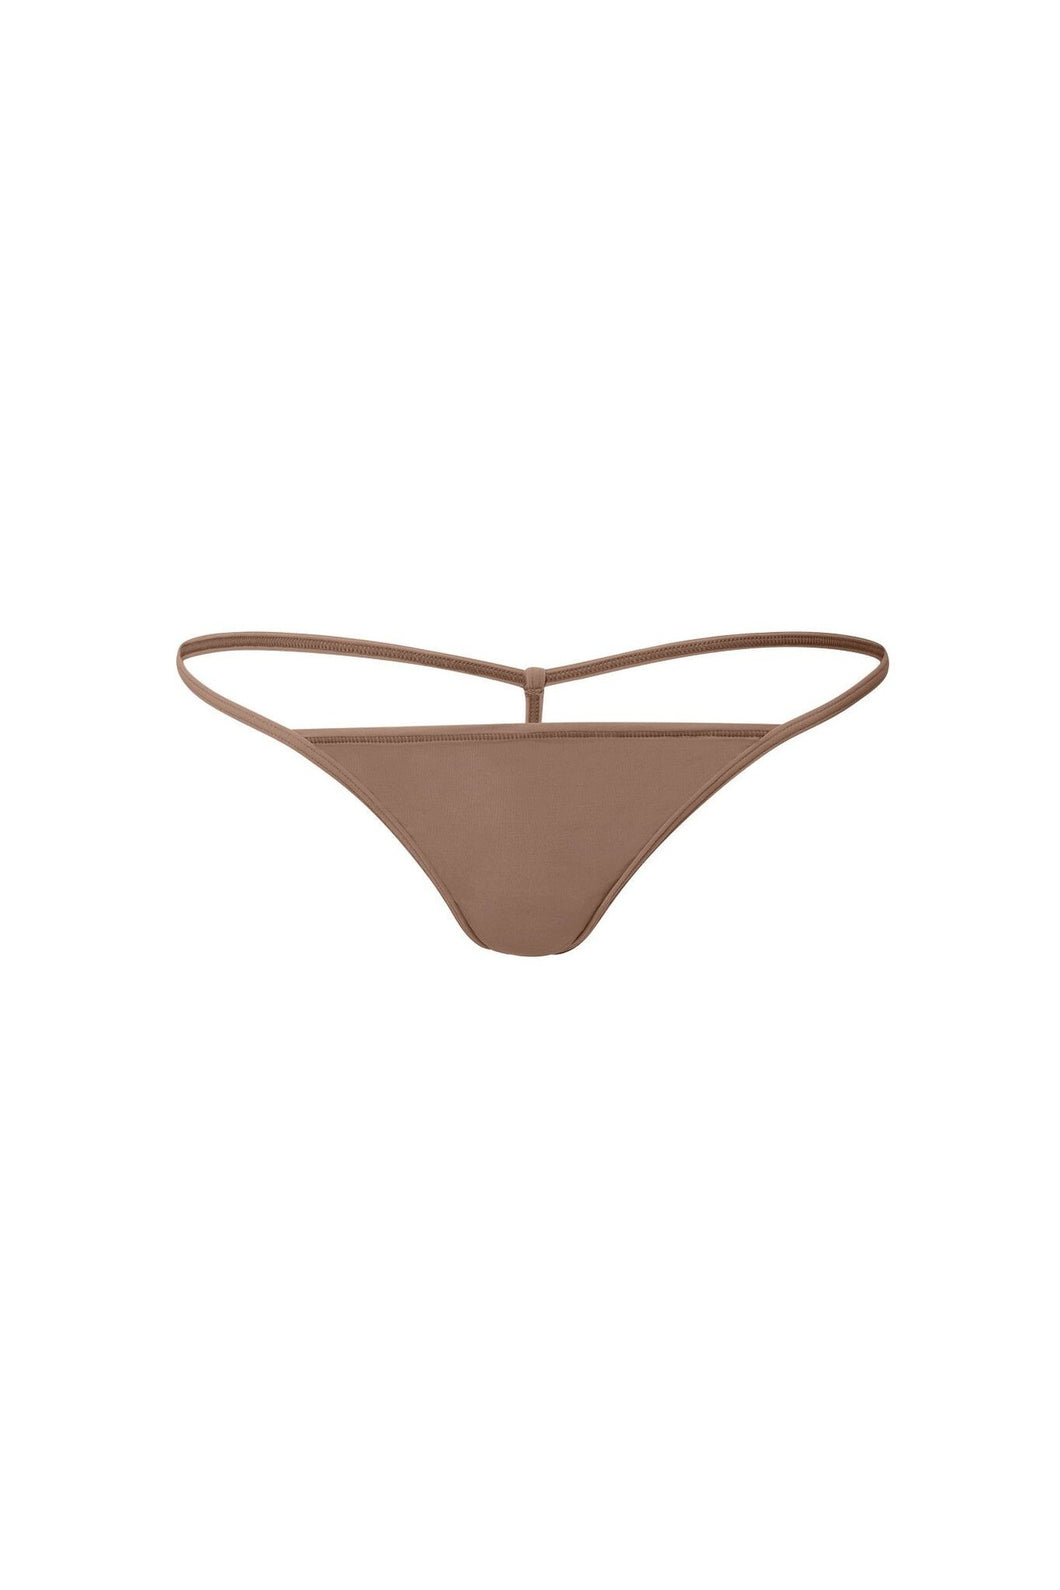 nueskin Irina No-Cut G-String in color Beaver Fur and shape thong